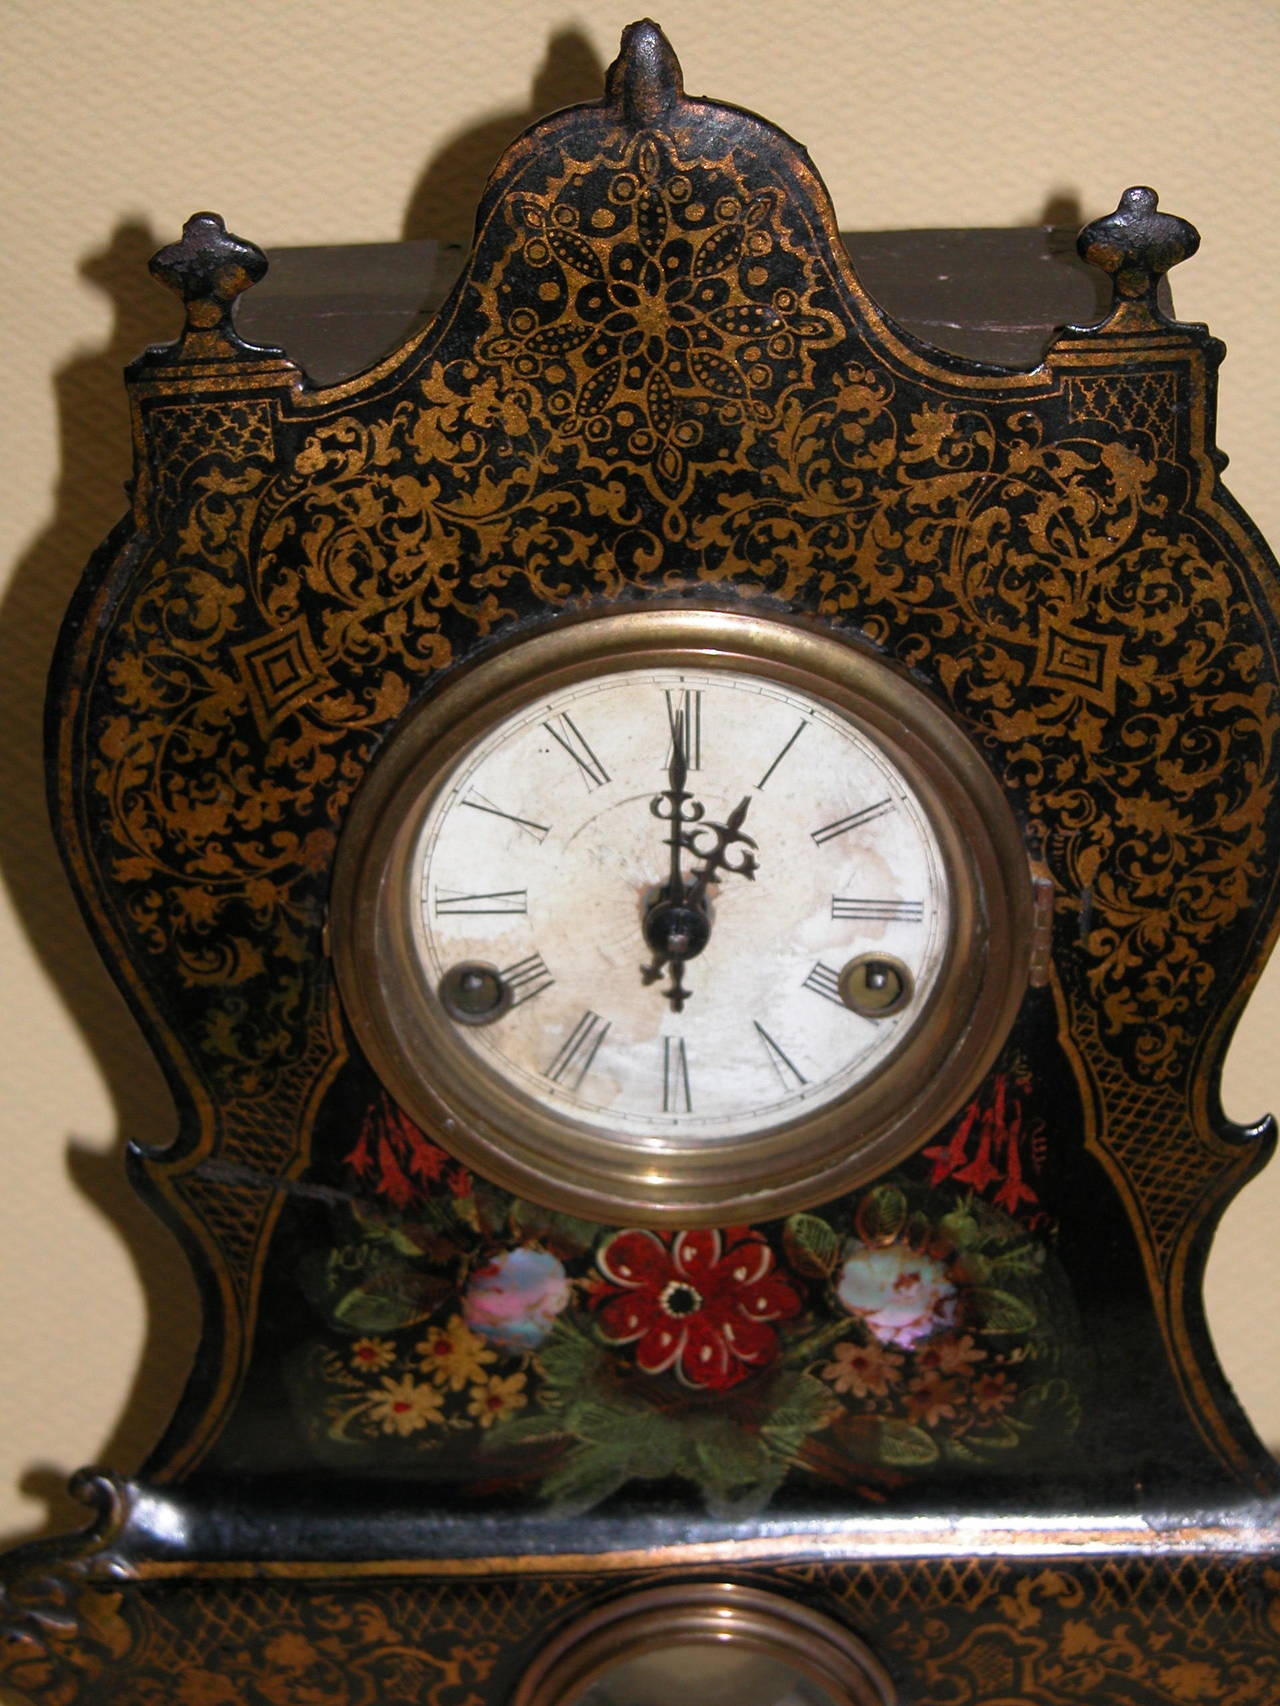 Victorian Clock with Cast Iron Face, Mother-of-Pearl Inlay and Floral Decoration 1